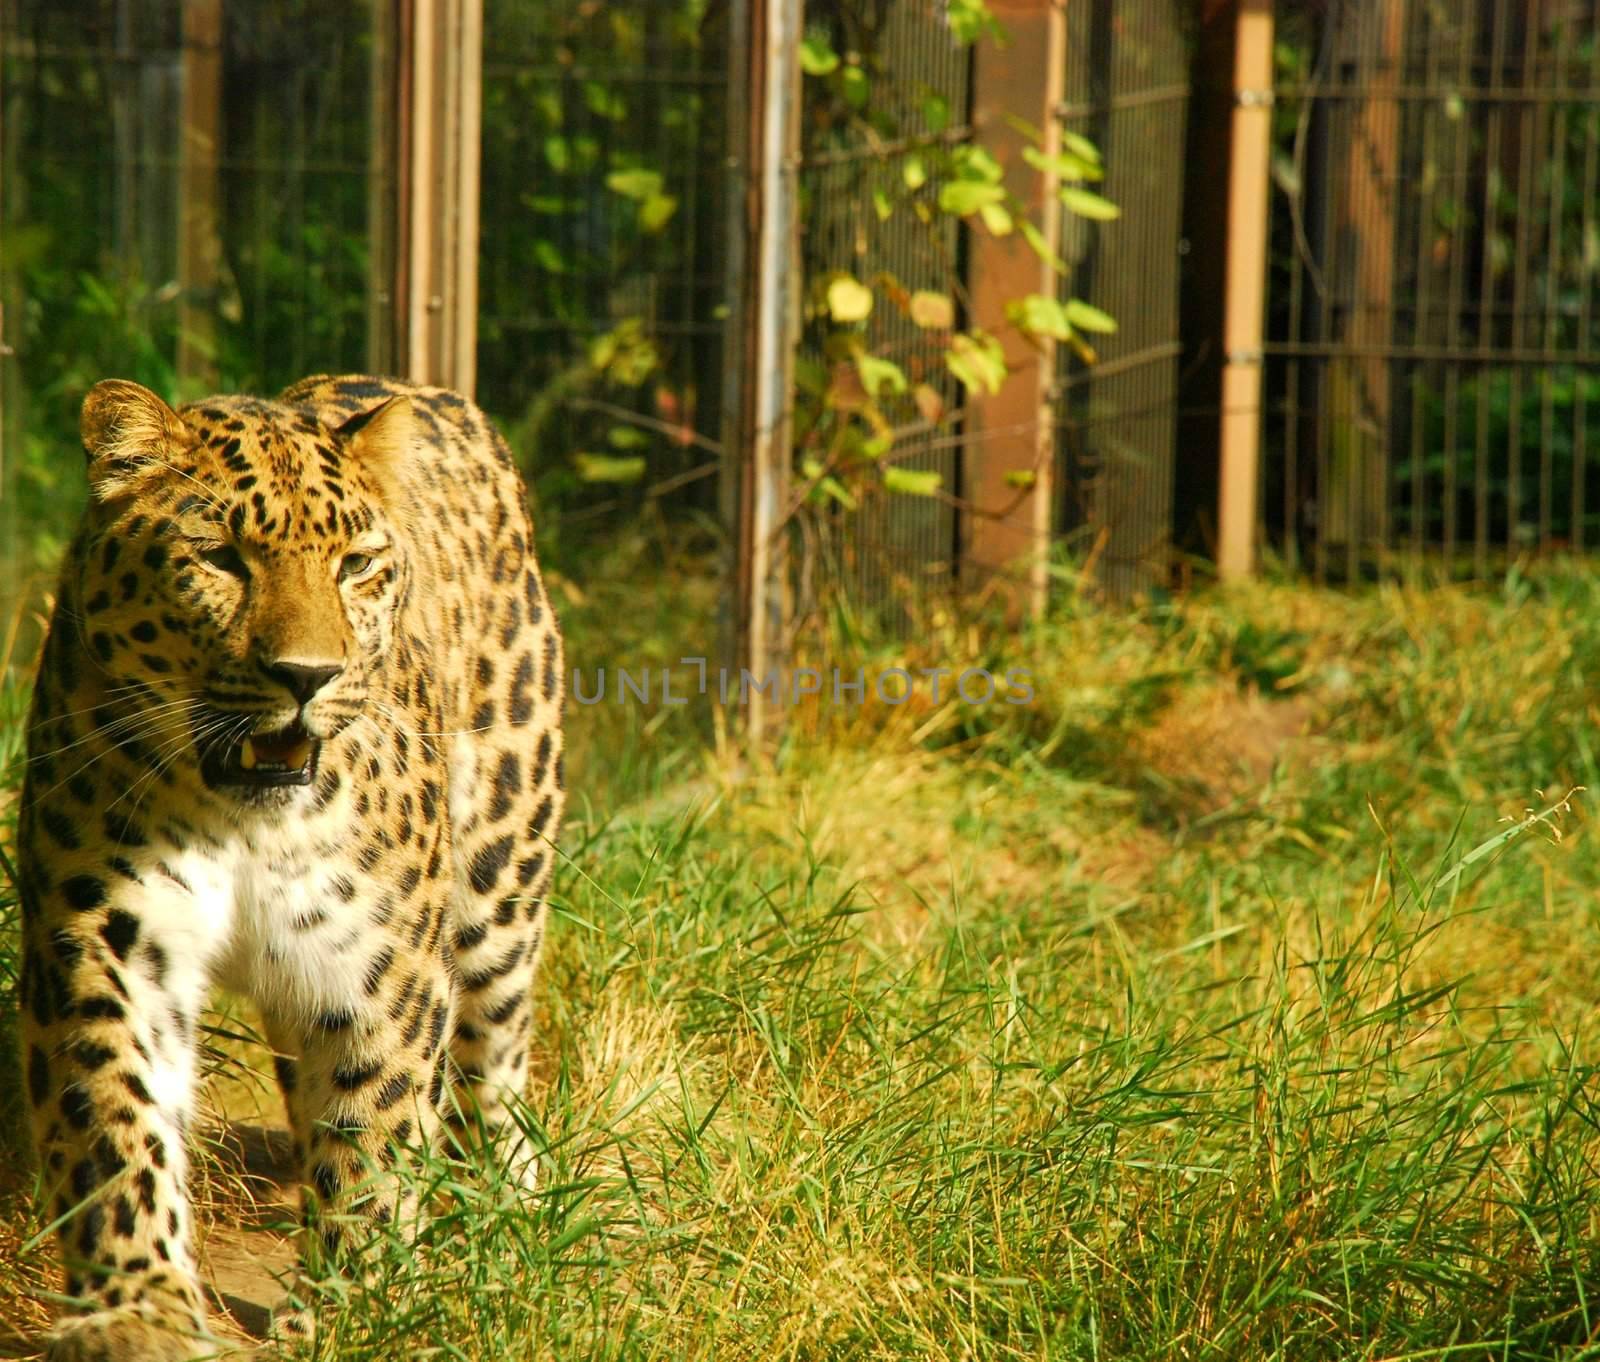 A beautiful cheetah lighted by the sun in helsinki's zoo. it's walking peacefully, has beautiful green eyes.